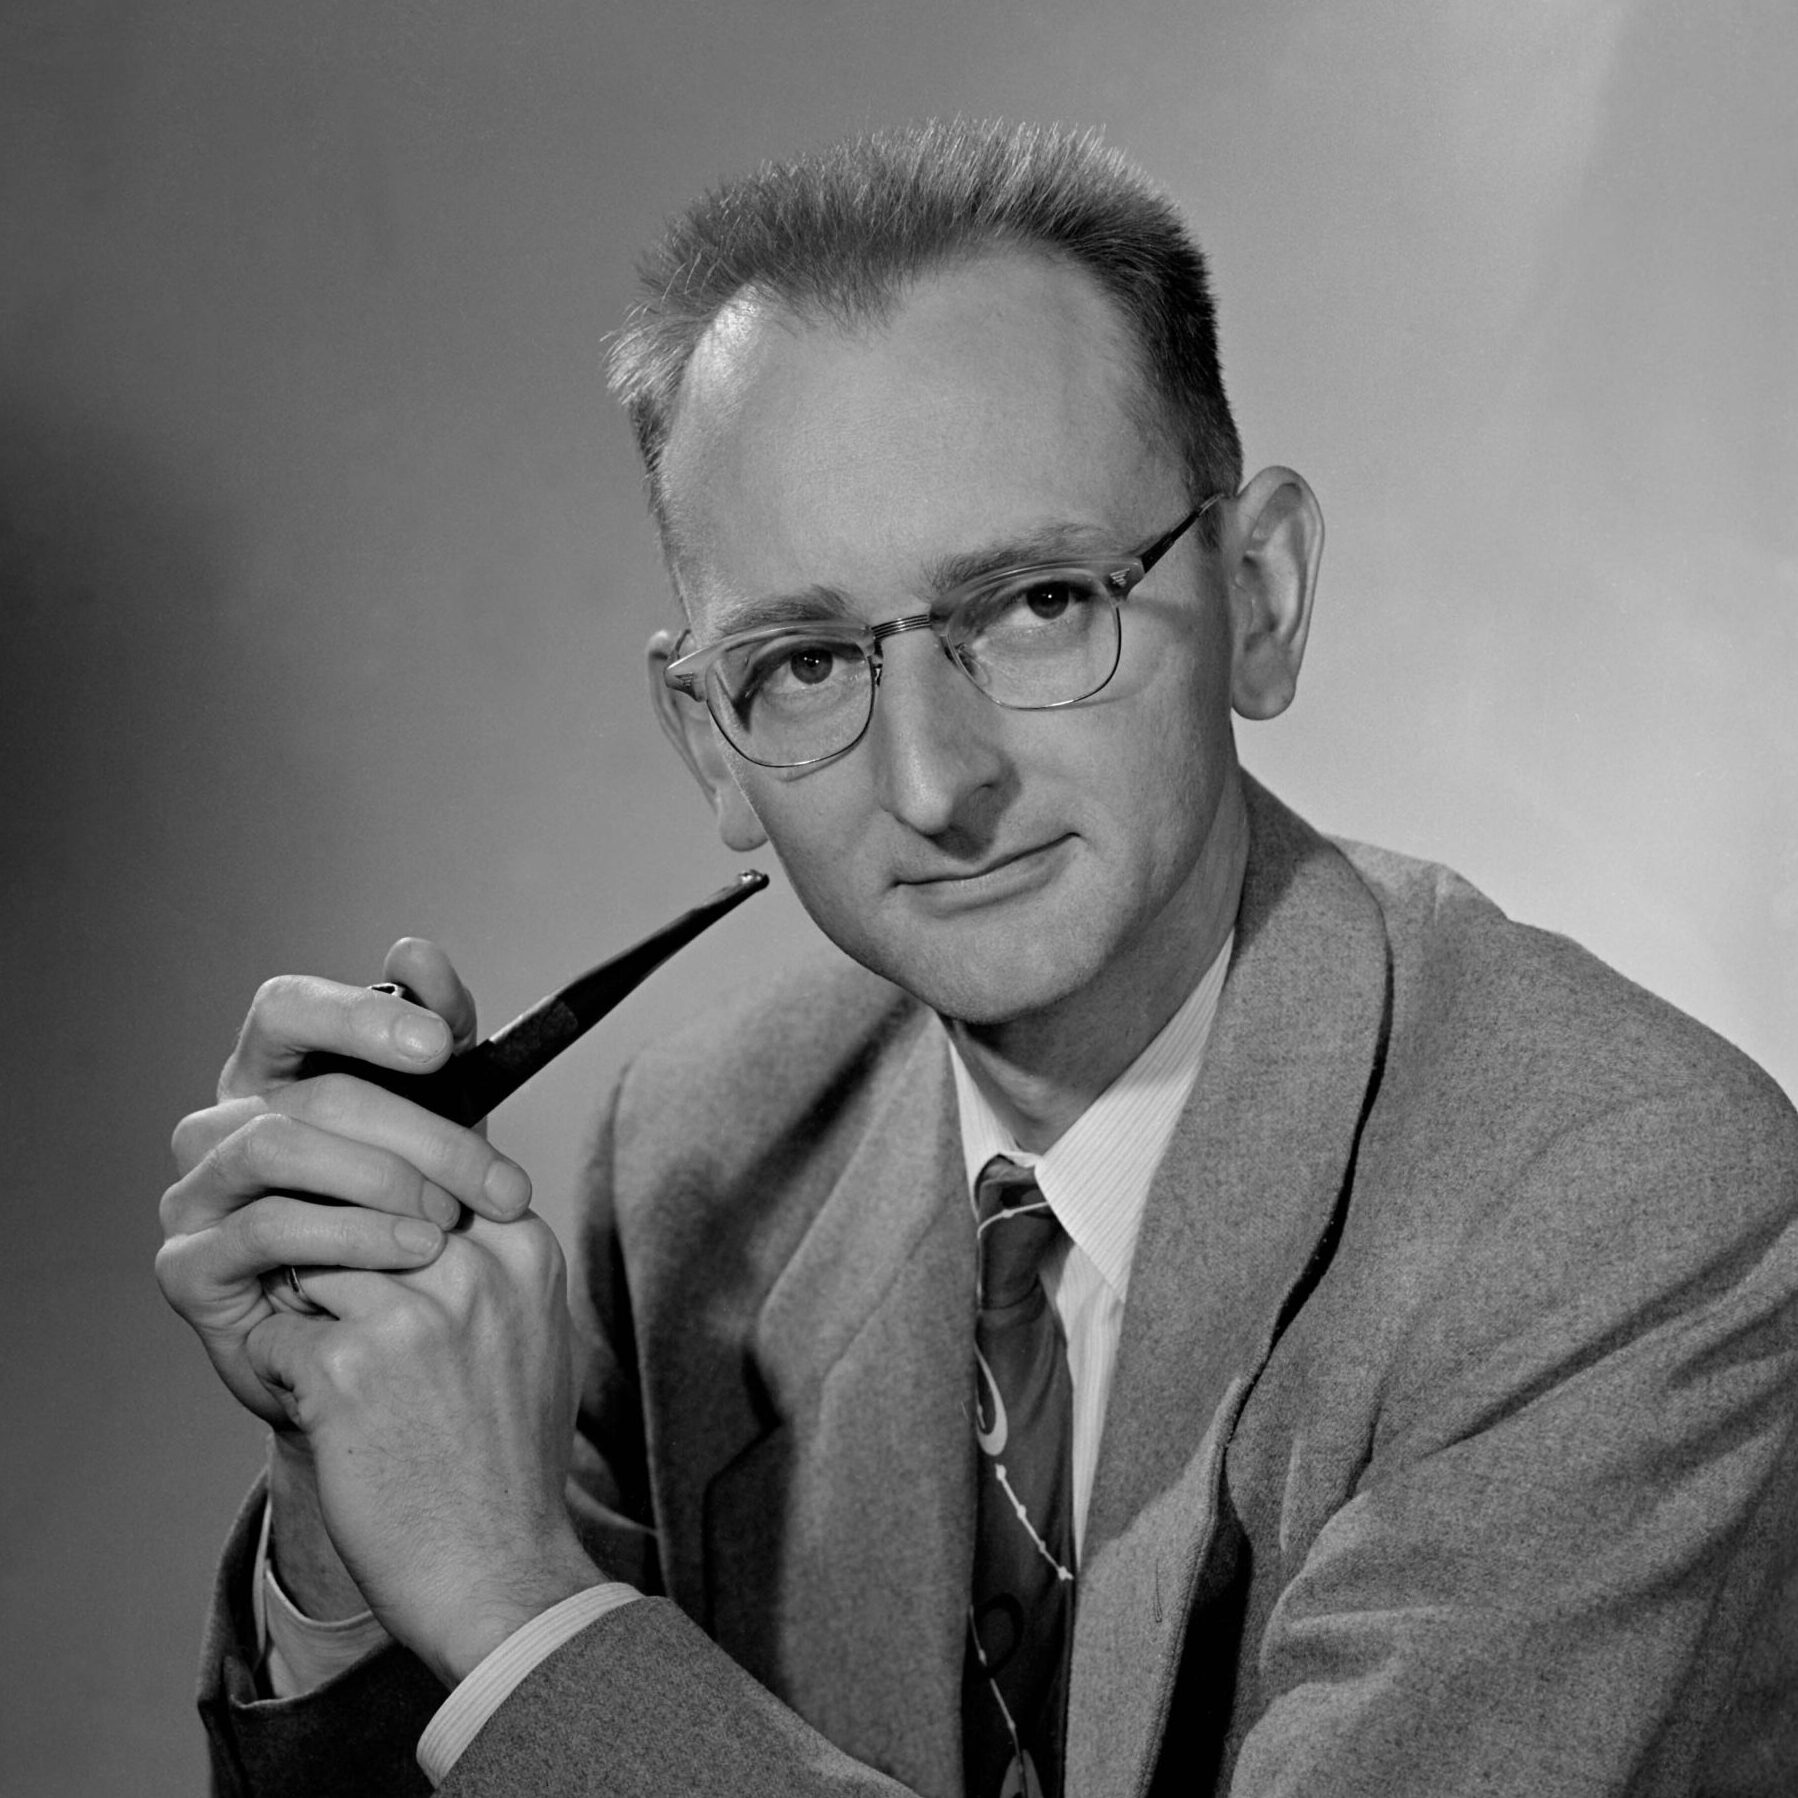 Short-haired person in glasses holding a smoking pipe.